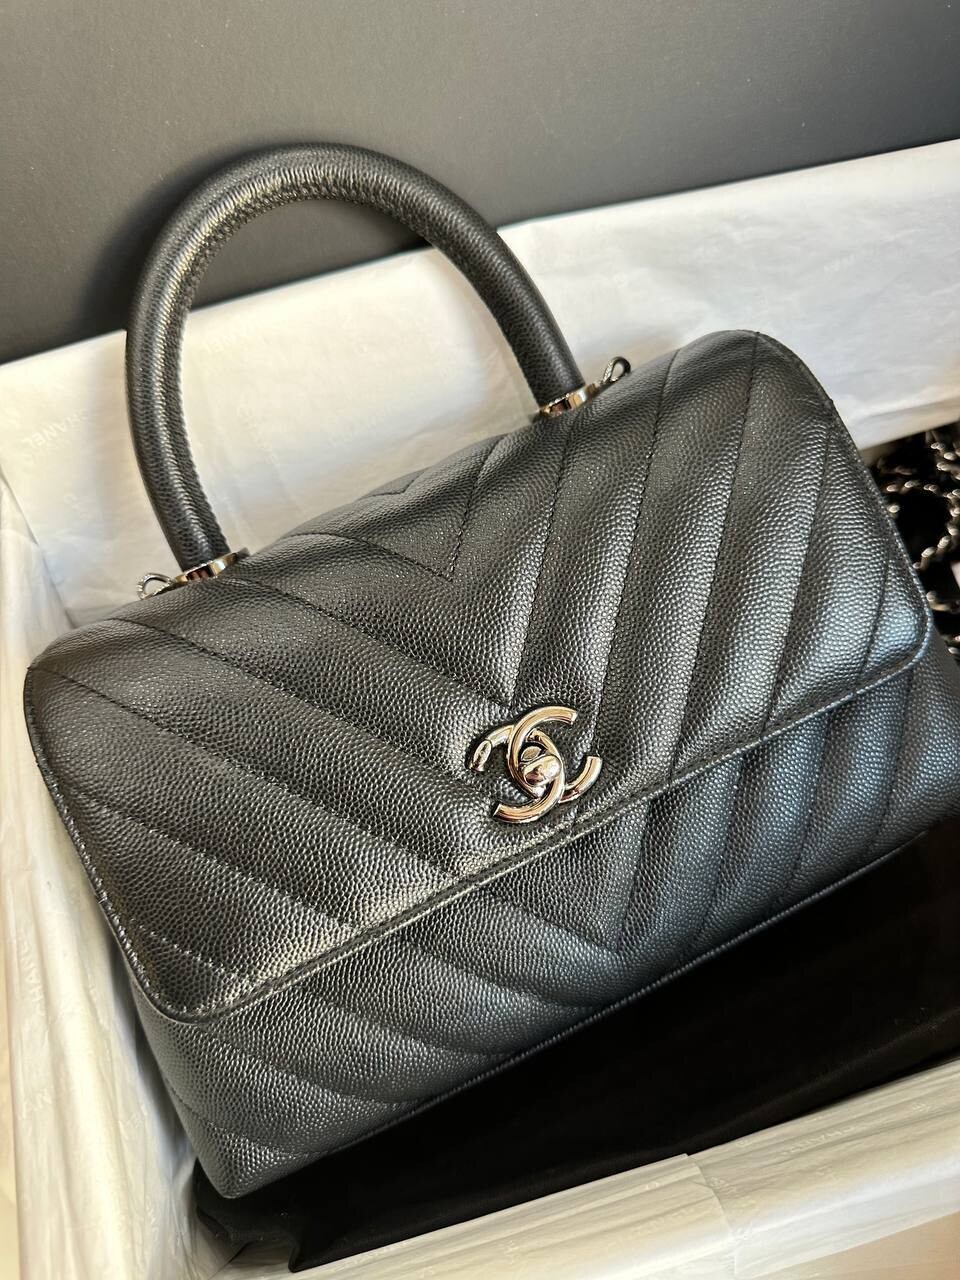 Chanel Coco Handle Mini, Black Caviar Leather with Gold Hardware, Preowned  in Box (Ships from London)